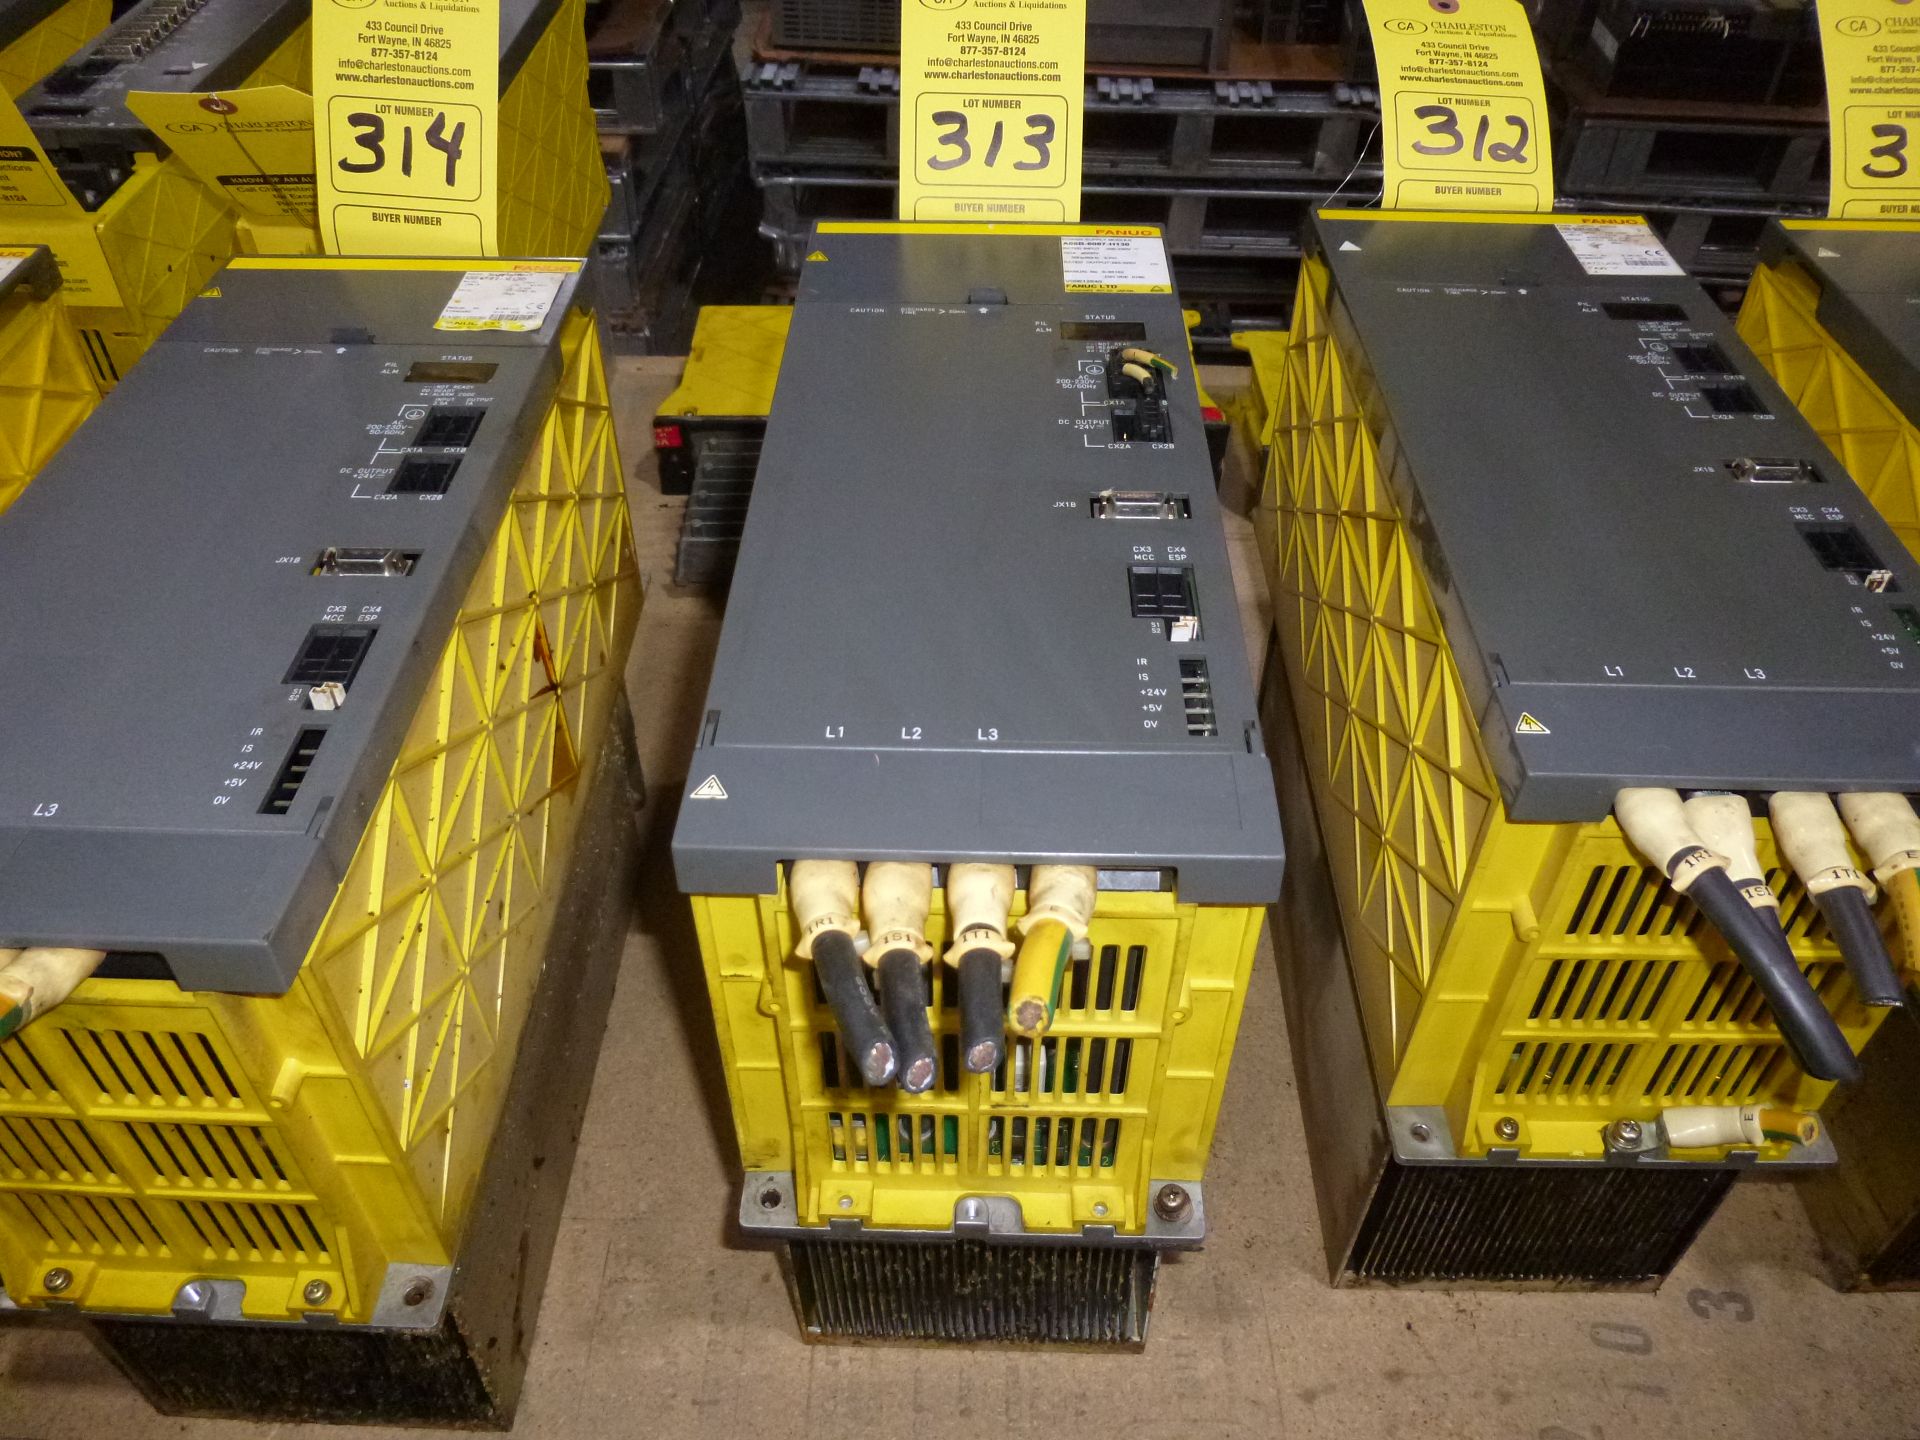 Fanuc power supply module model A06B-6087-H130, as always with Brolyn LLC auctions, all lots can